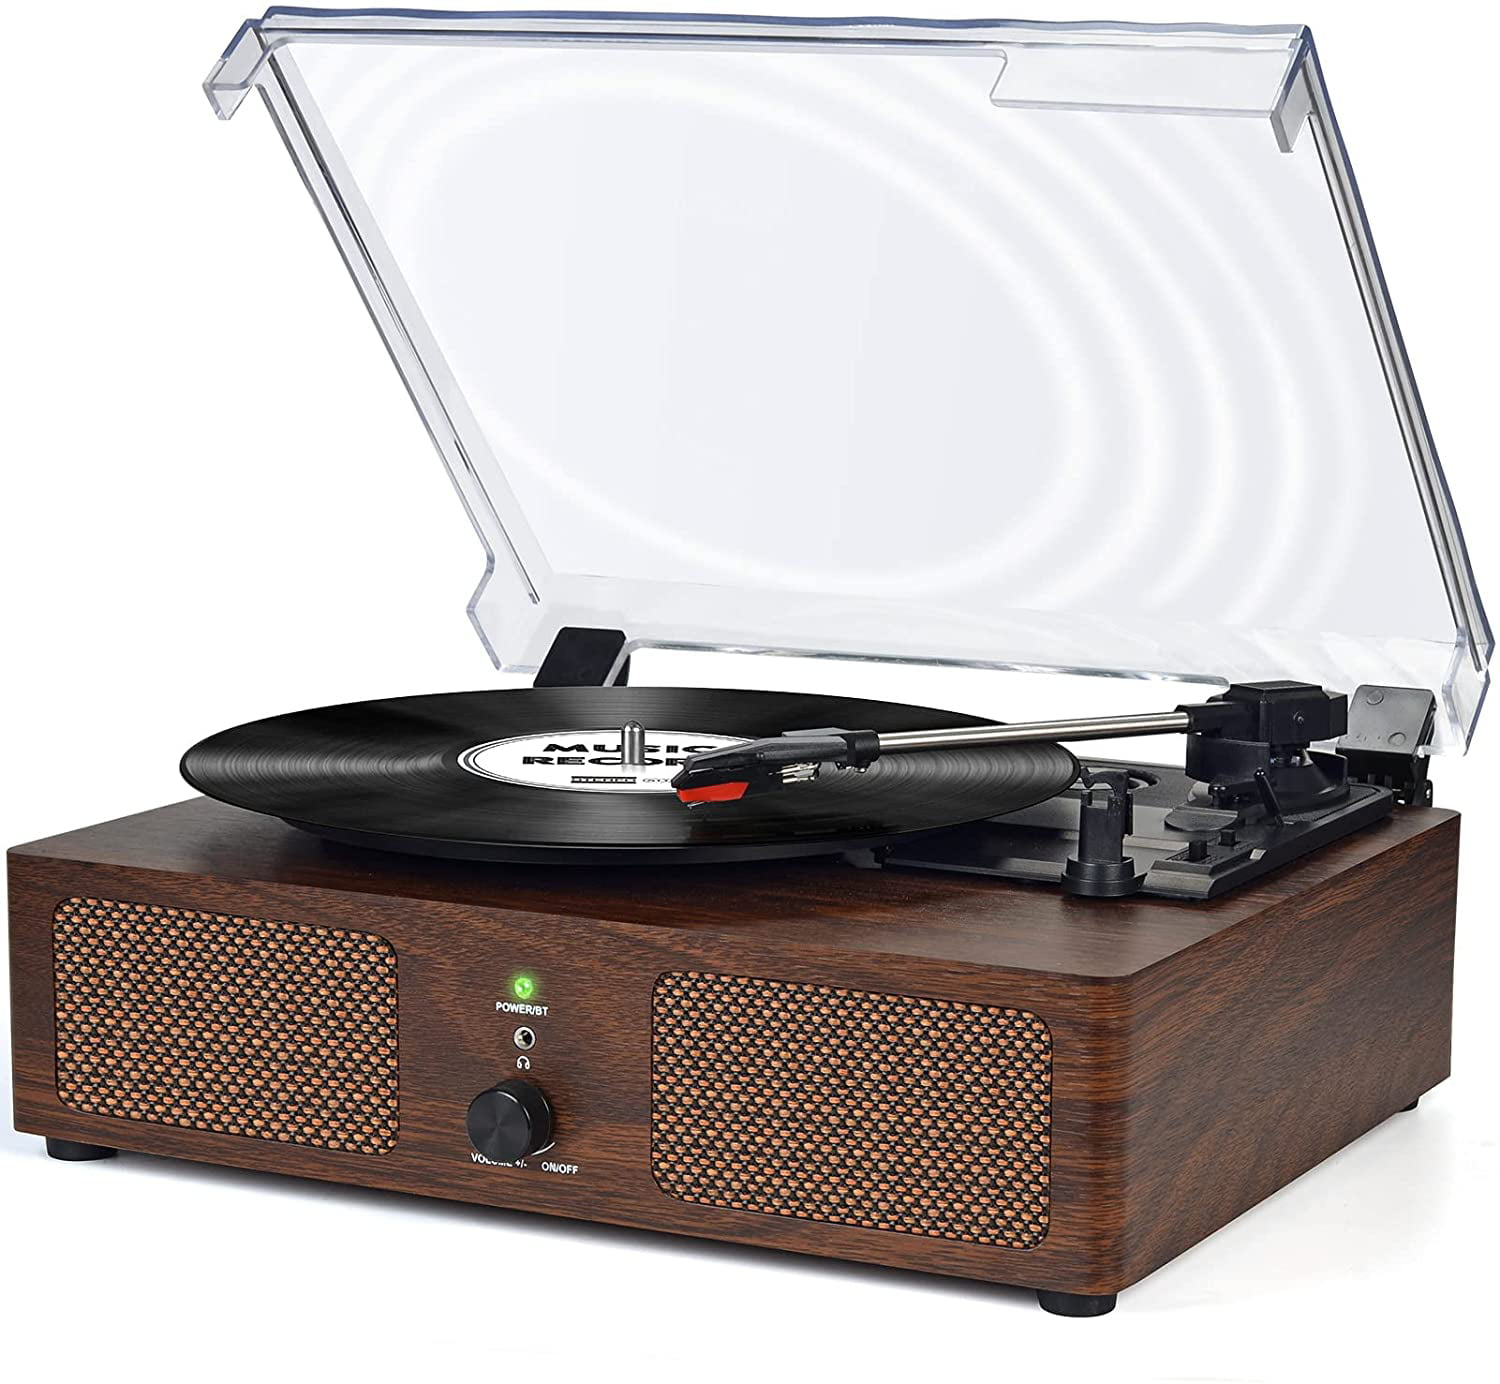 Vinyl Record Player Turntable Bluetooth with Speakers 3-Speed Belt-Driven LP Phonograph Player Portable Vintage Record Player